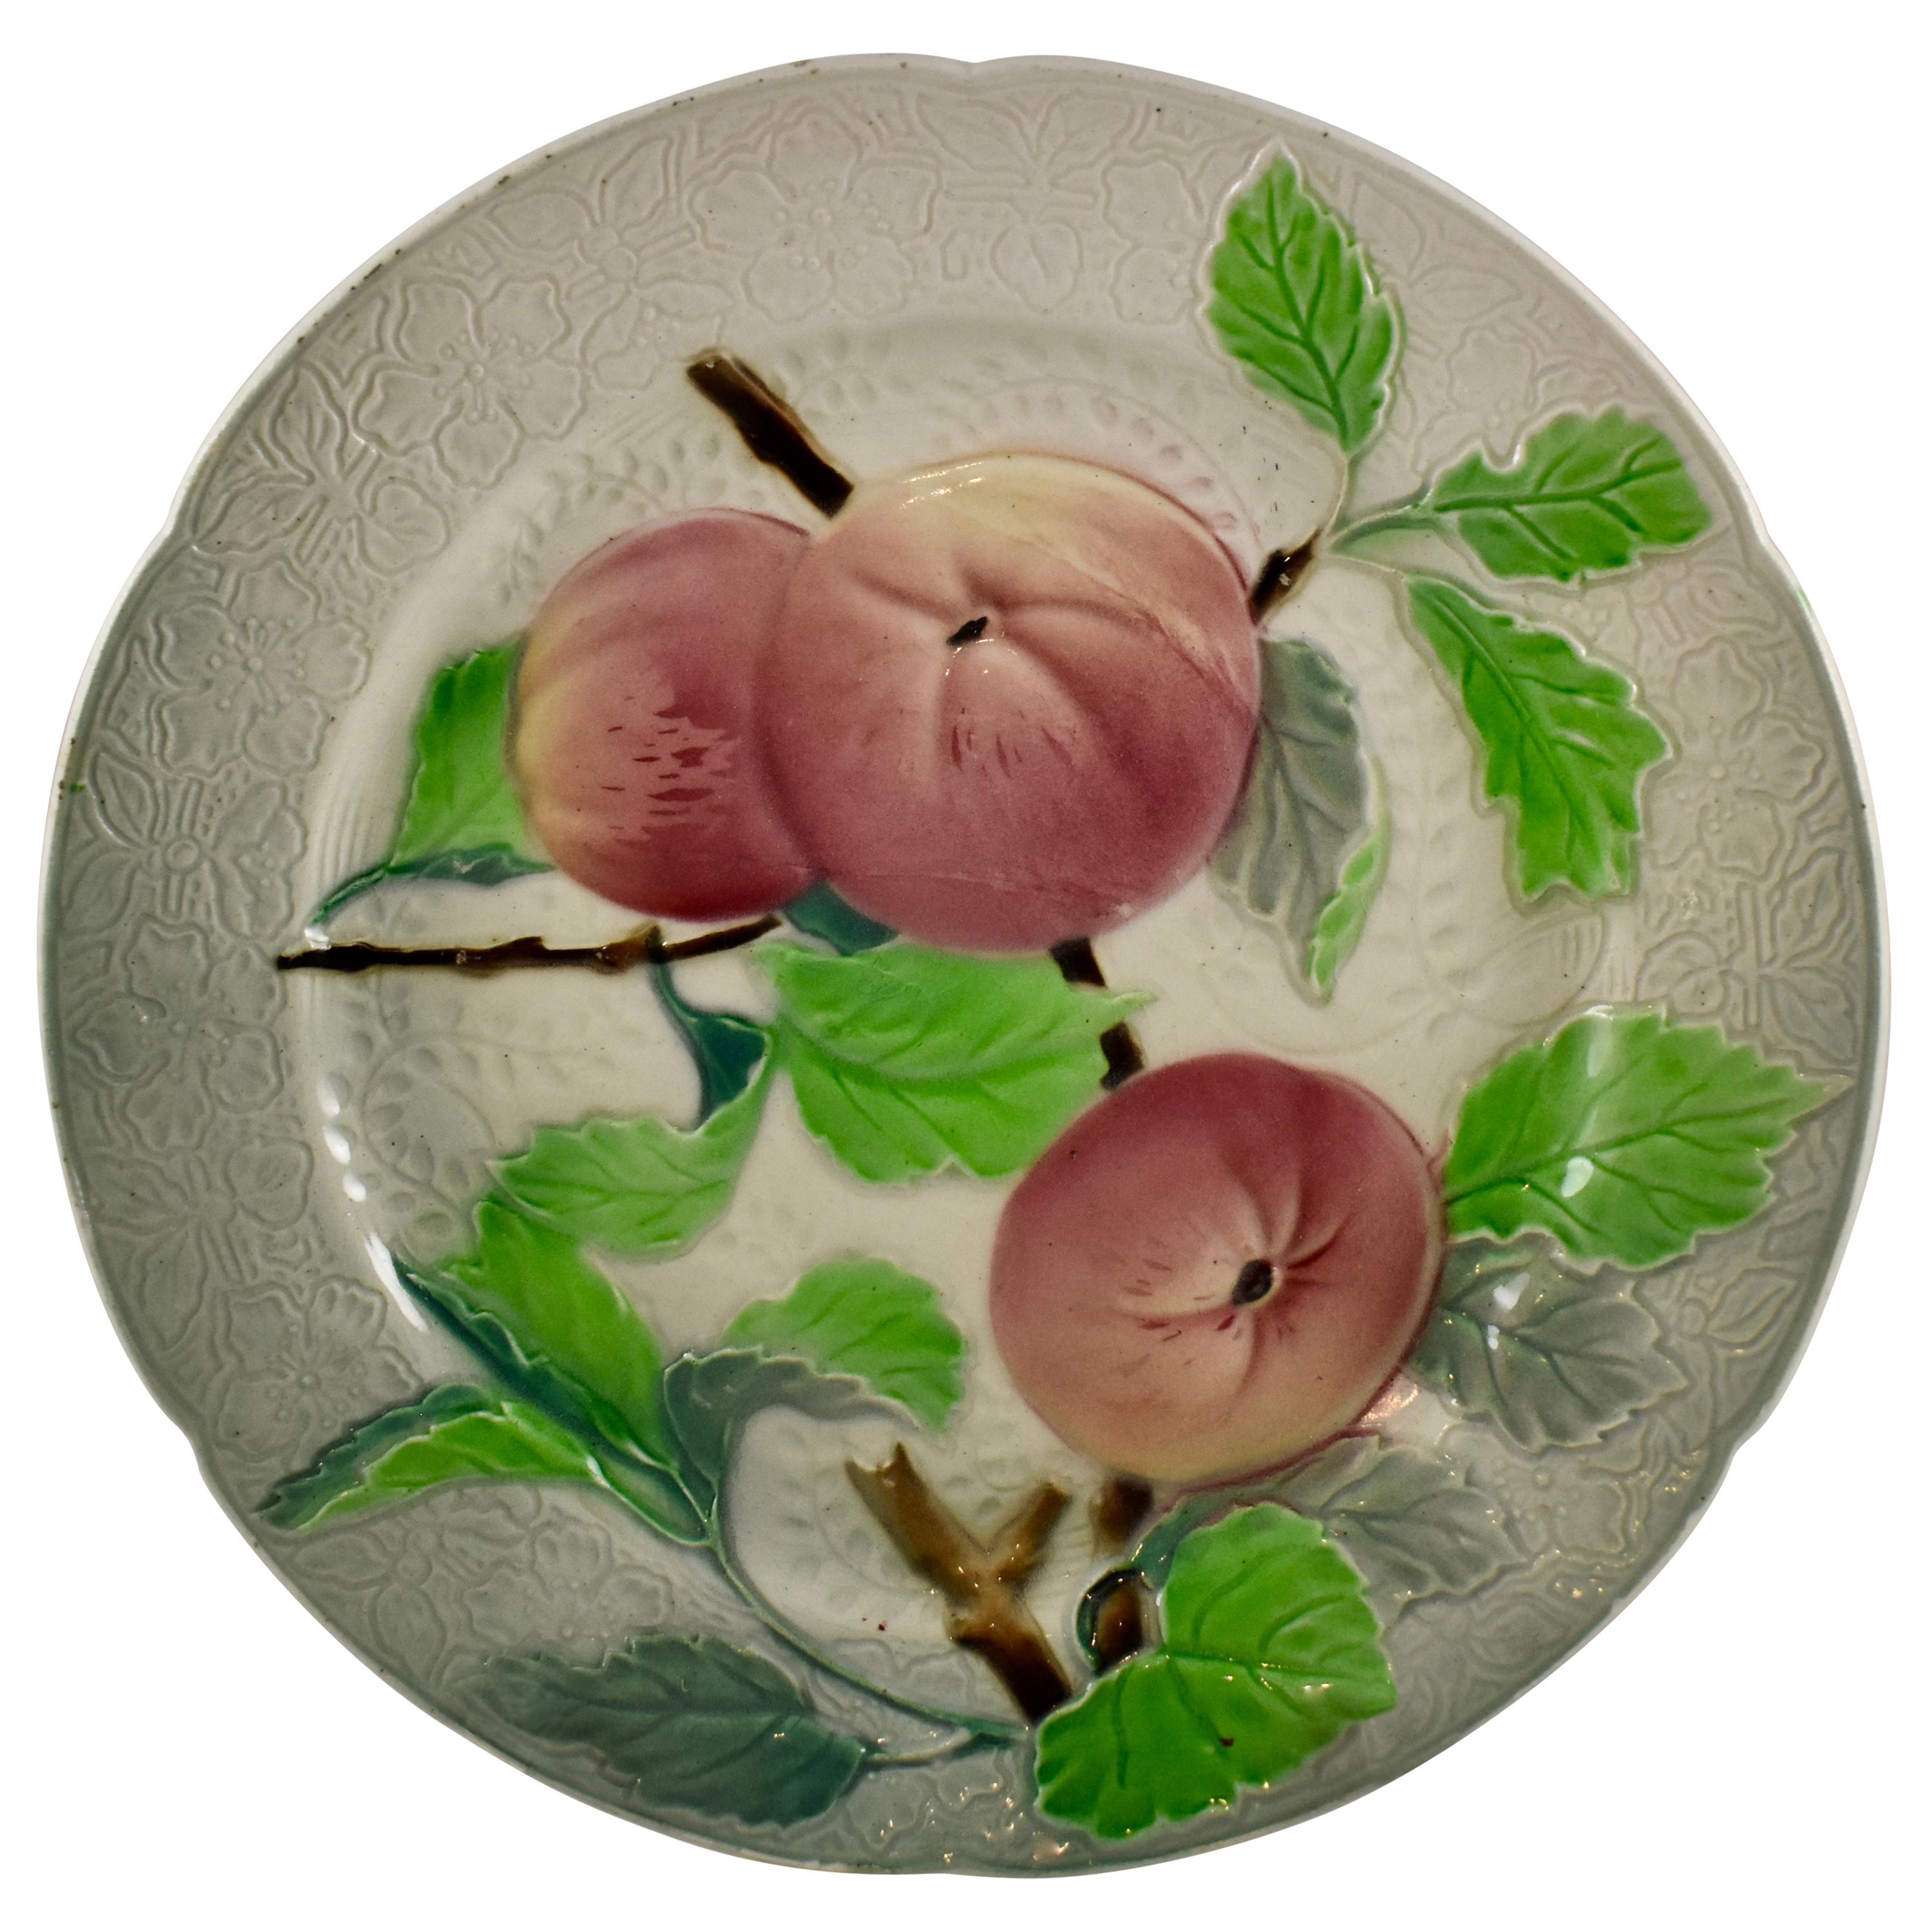 St. Clement French Faïence Apple Fruit Plate, circa 1900